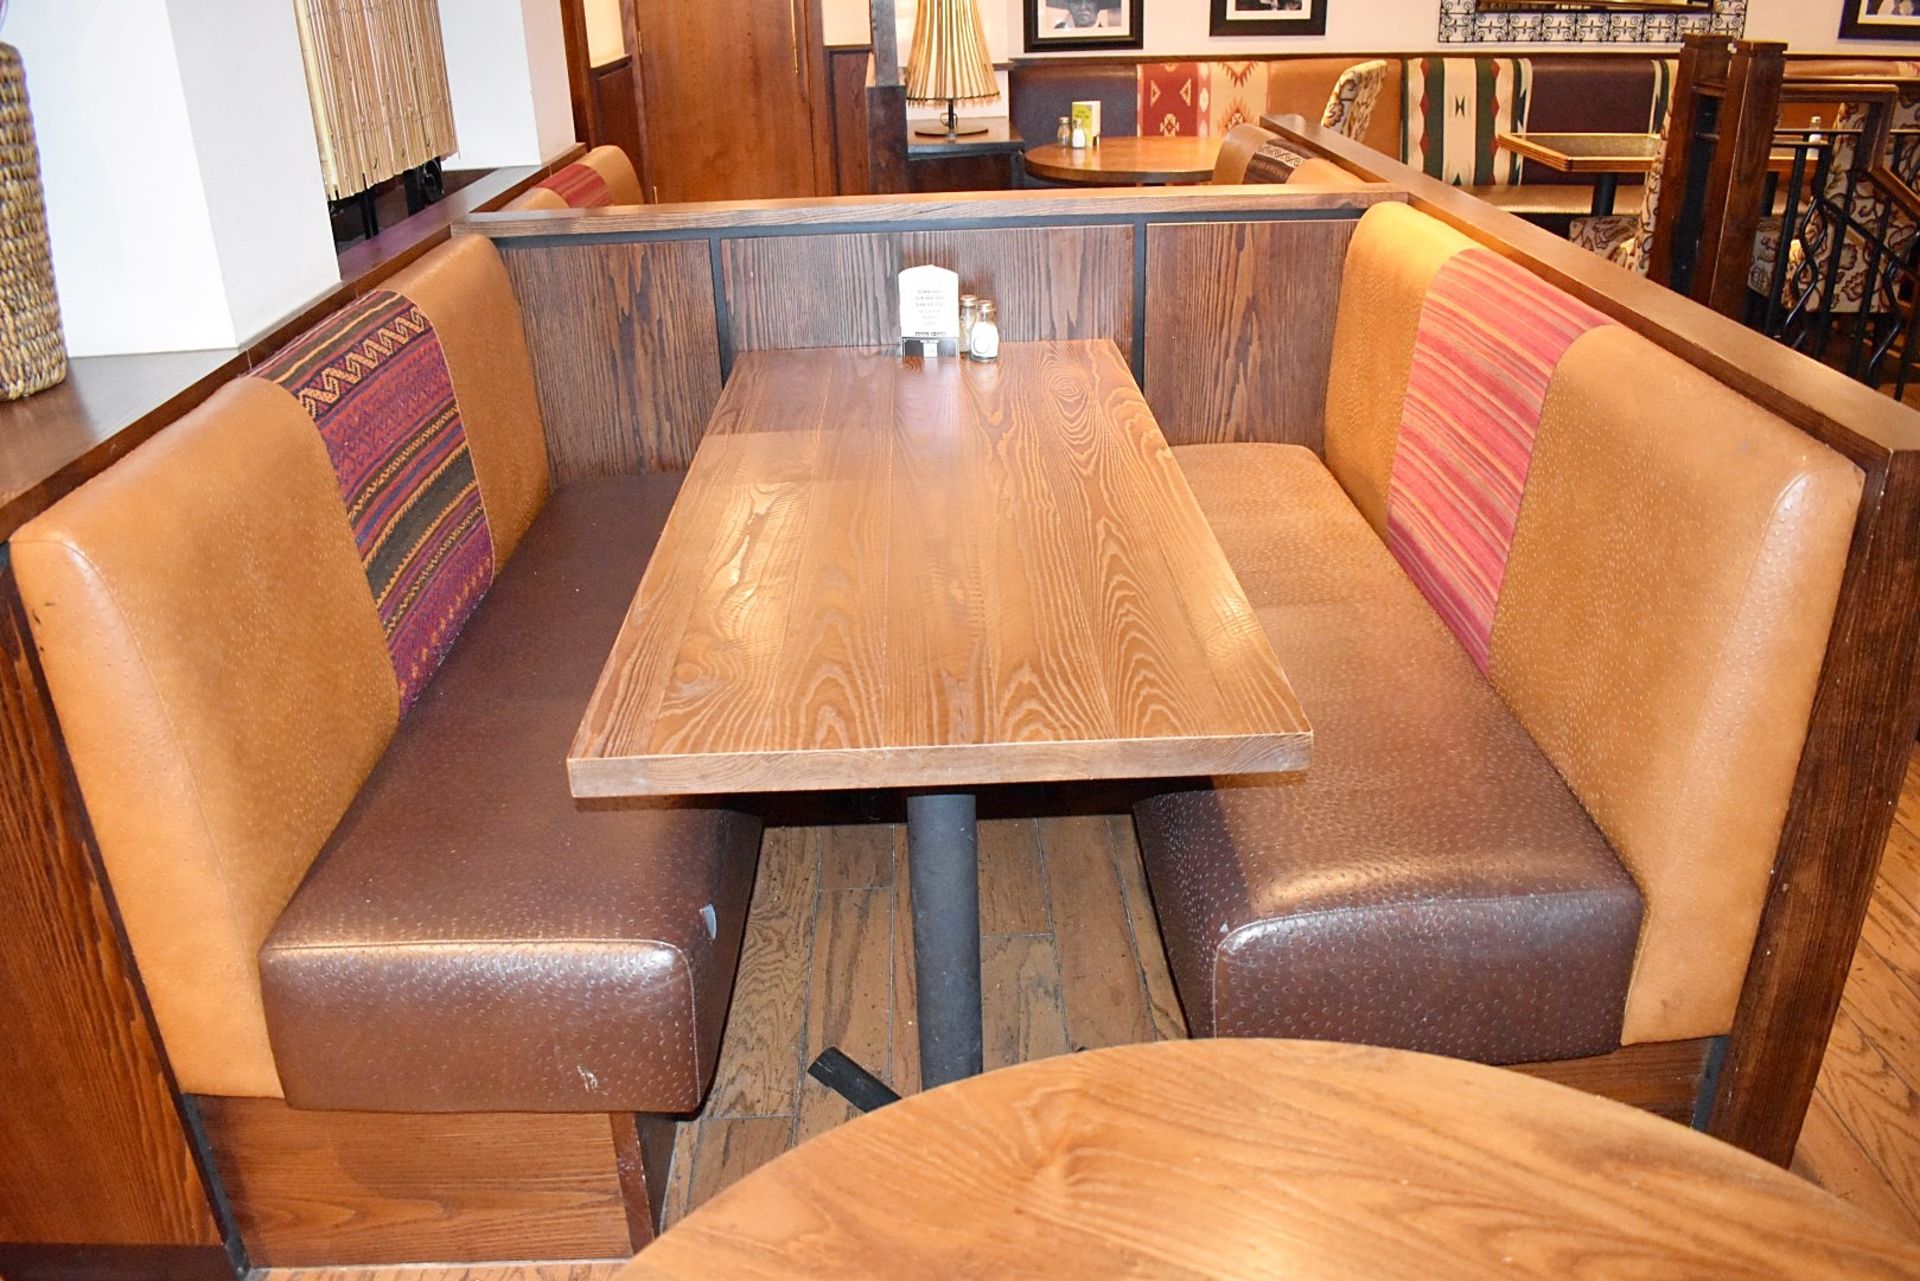 15-Pieces Of Restaurant Booth Seating Of Varying Length - Image 18 of 22